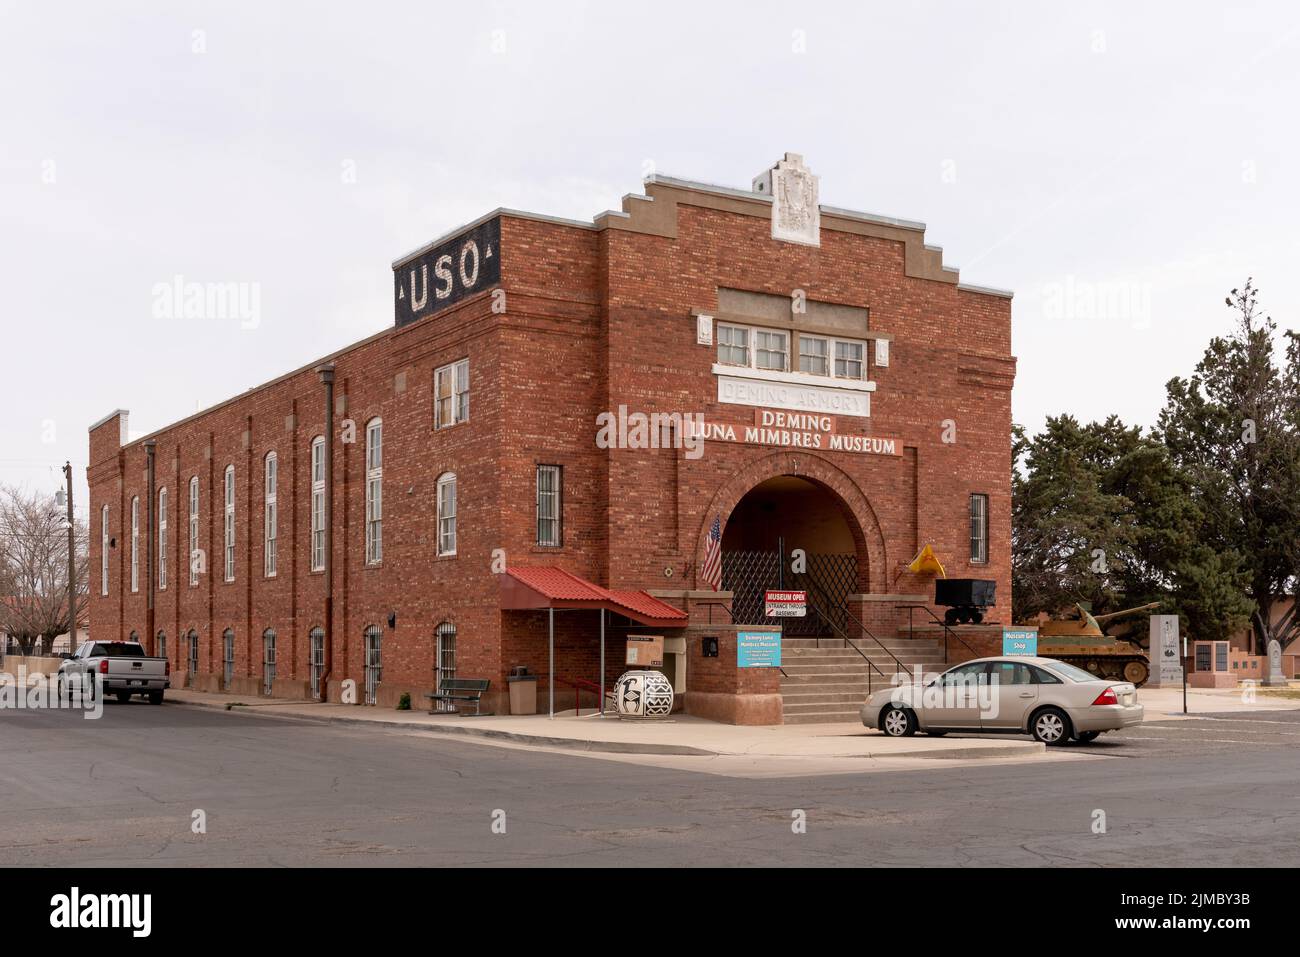 The Deming Luna Mimbres Museum, originally a National Guard Armory built in 1889, Deming, New Mexico, United States Stock Photo